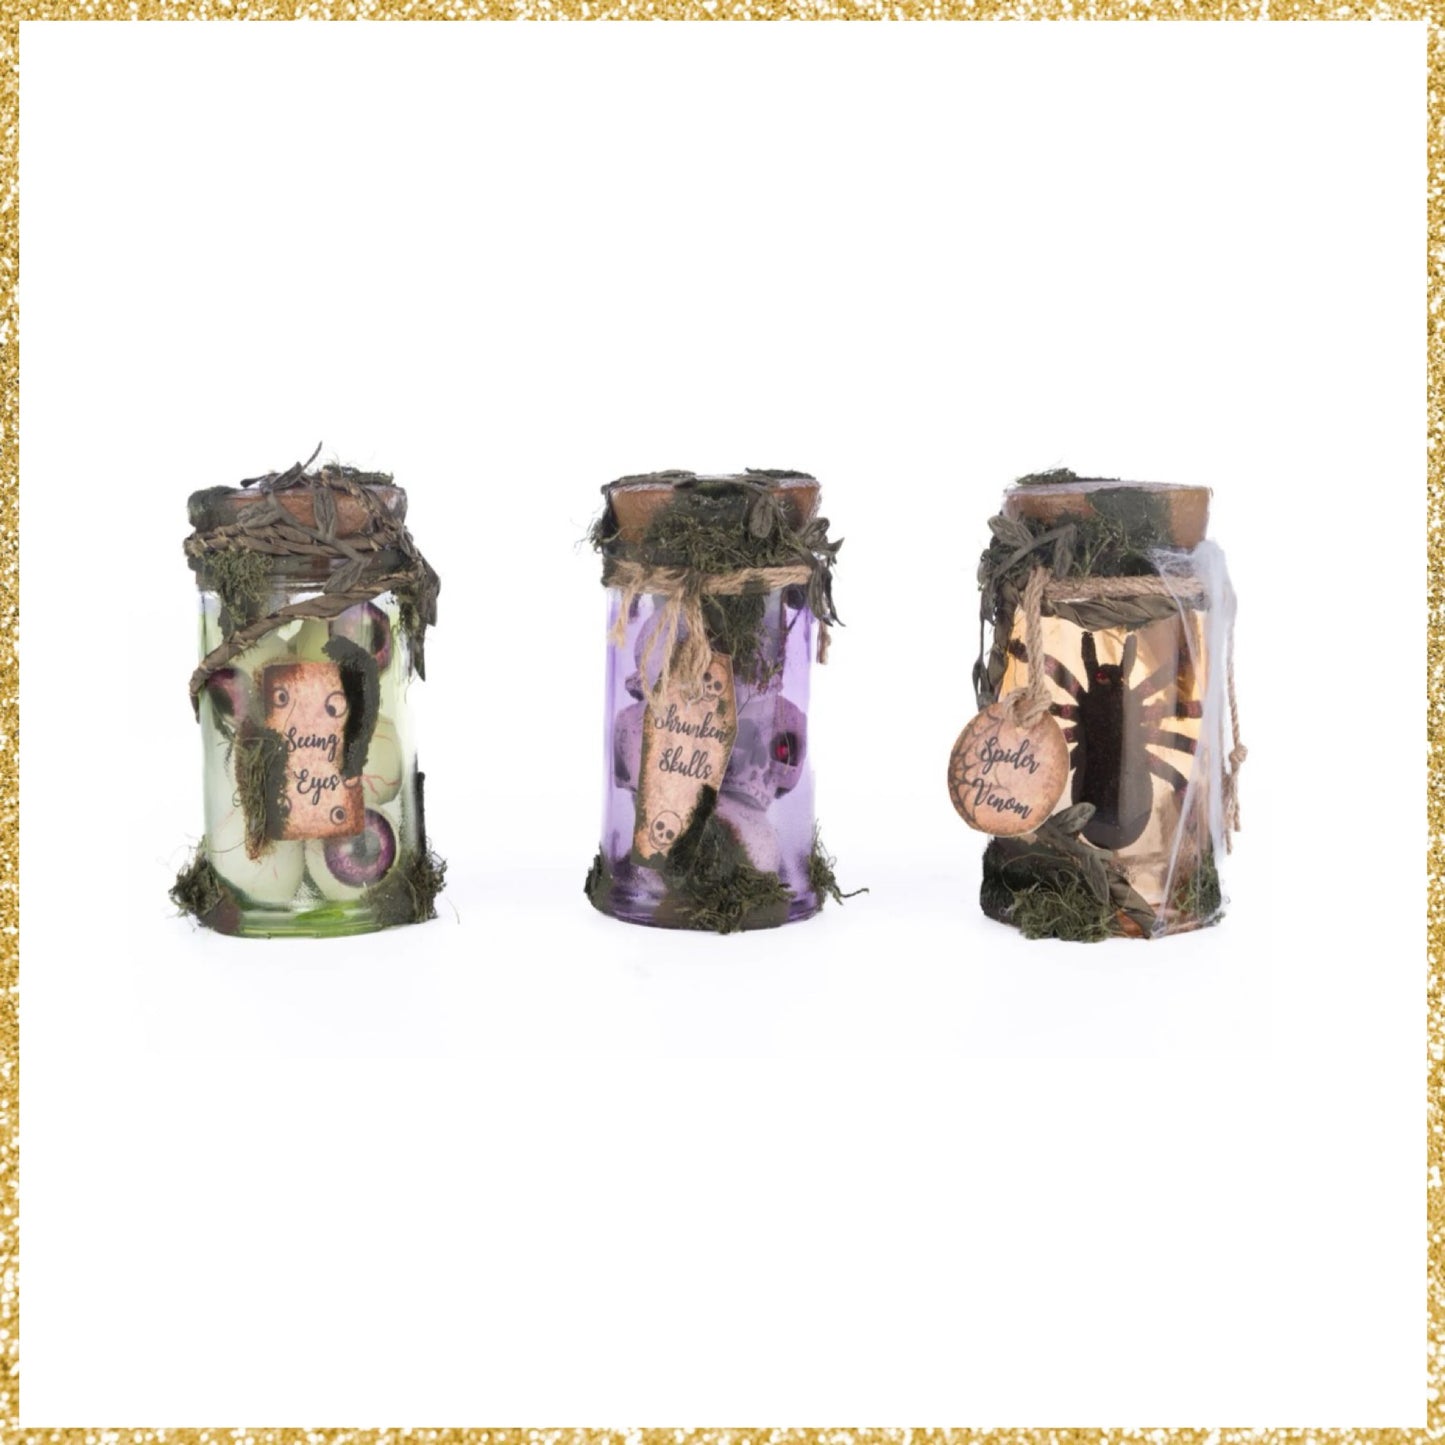 Katherine's Collection Broomstick Acres Potion Jars    Katherine's Collection Halloween Potion Bottles